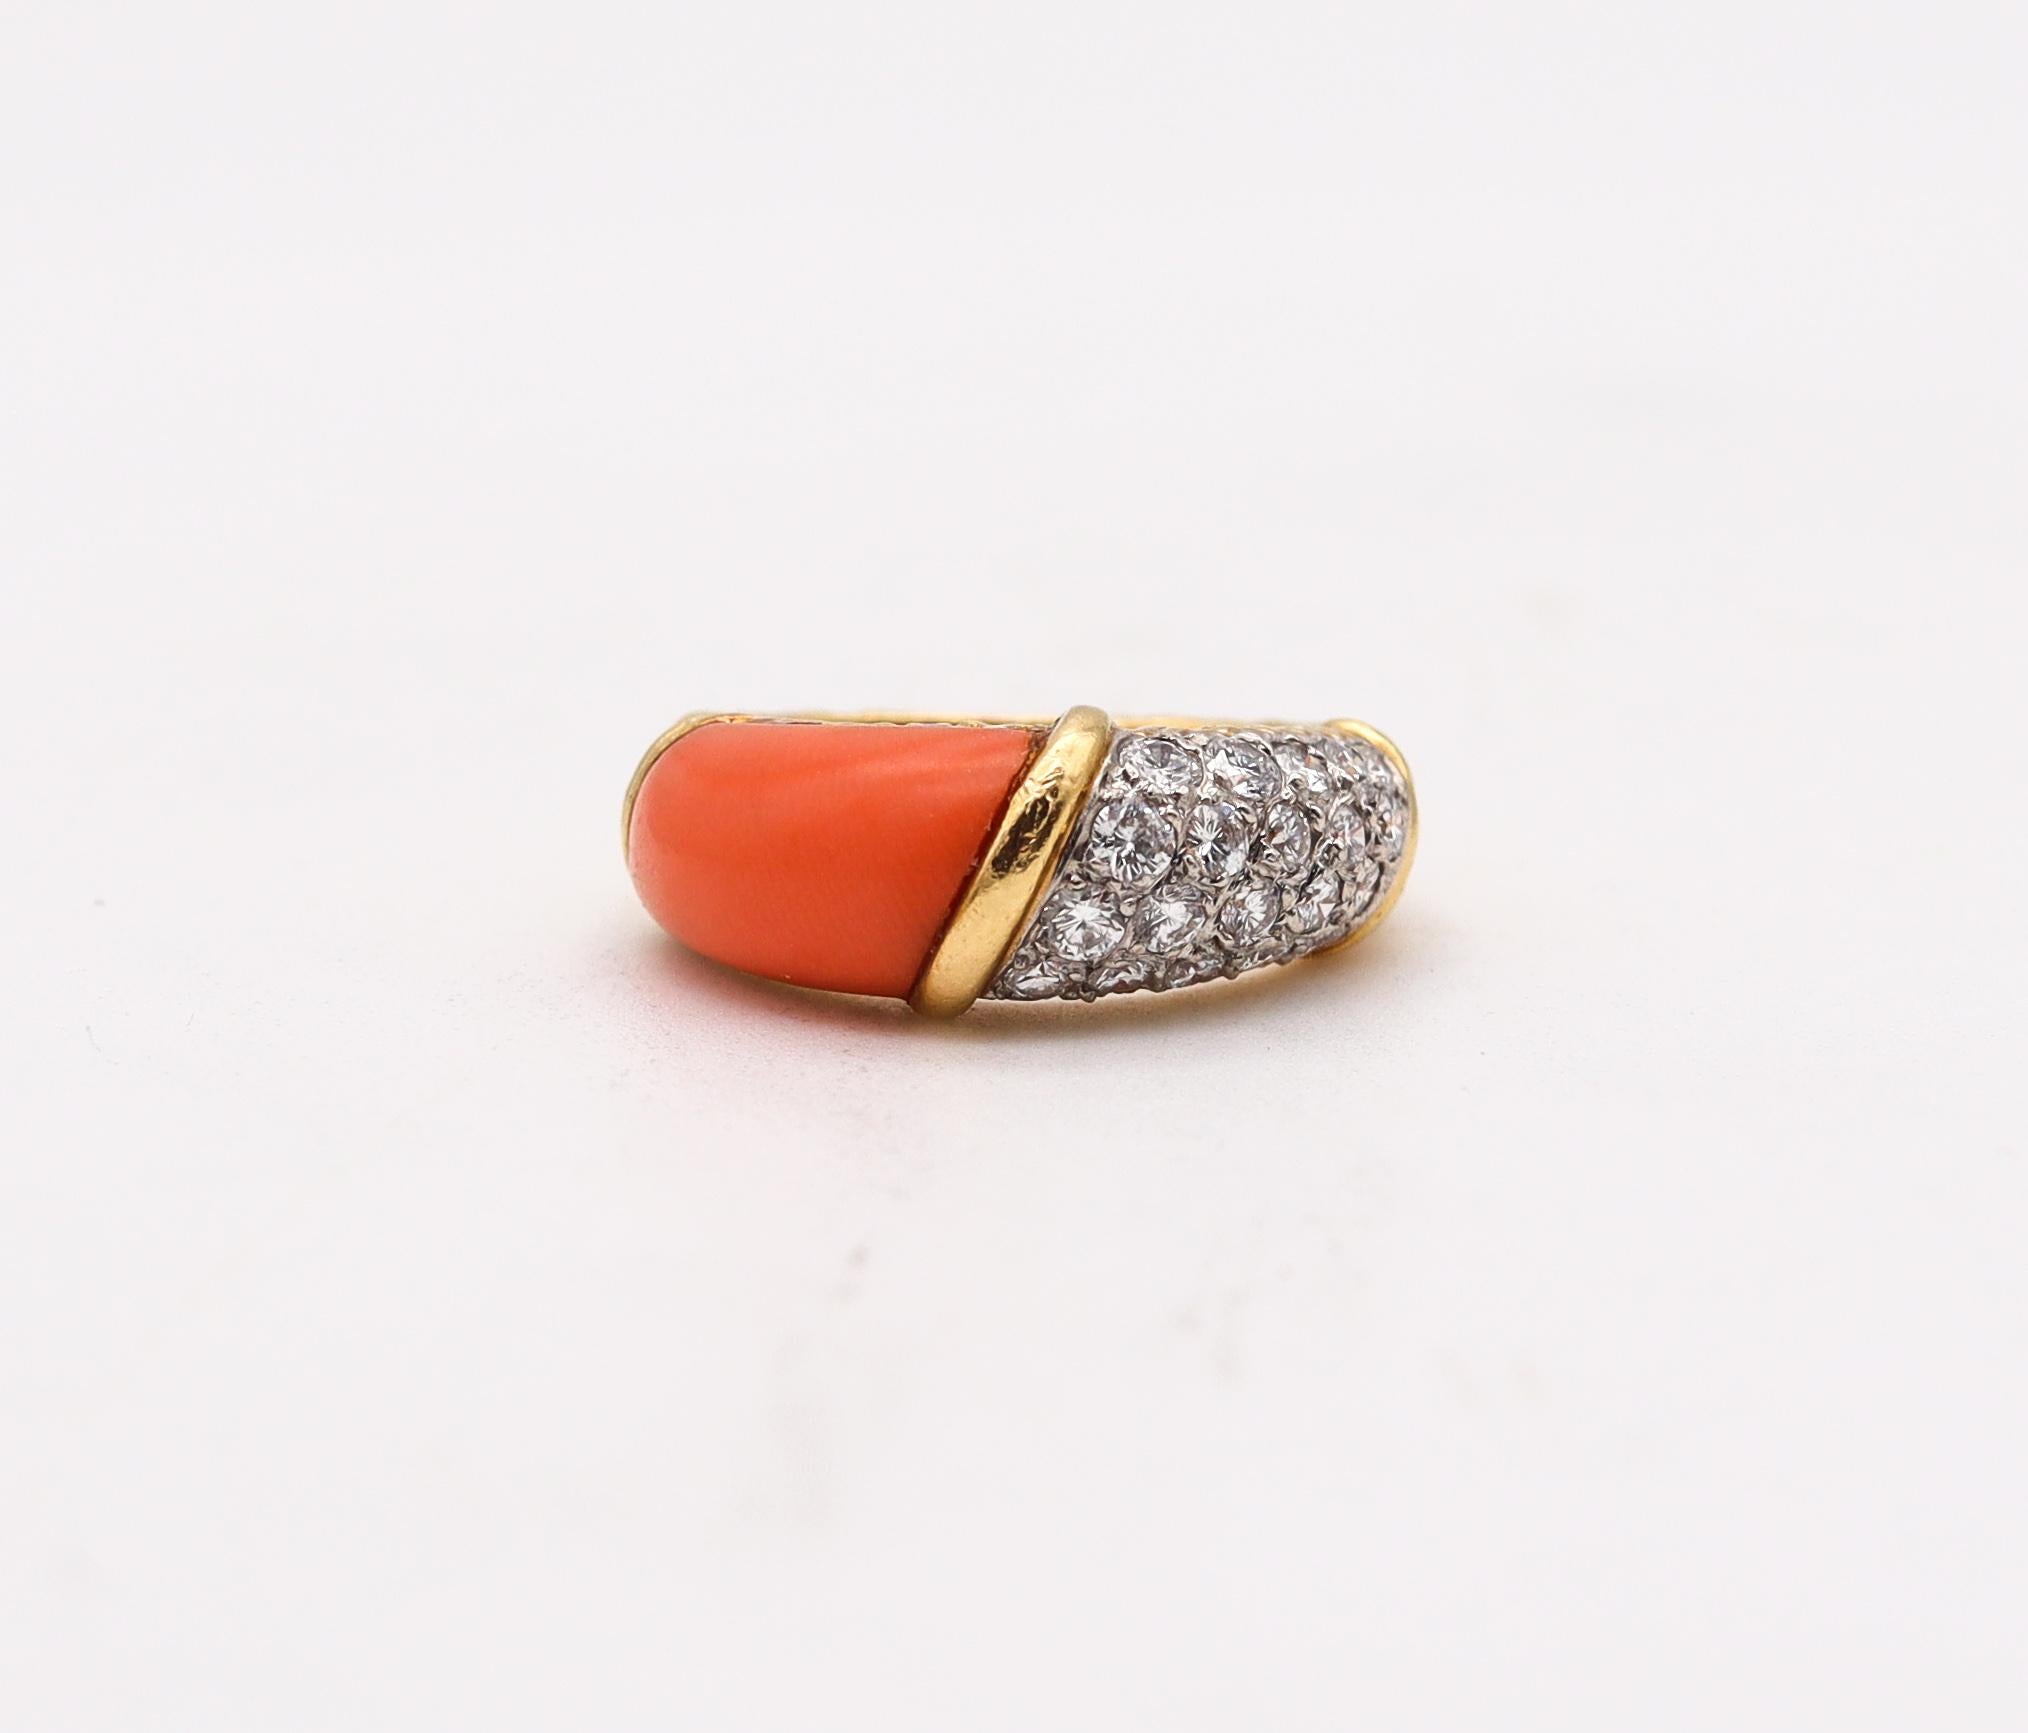 Women's Van Cleef & Arpels 1975 Gem Set Coral Band in 18Kt Yellow Gold with VVS Diamonds For Sale